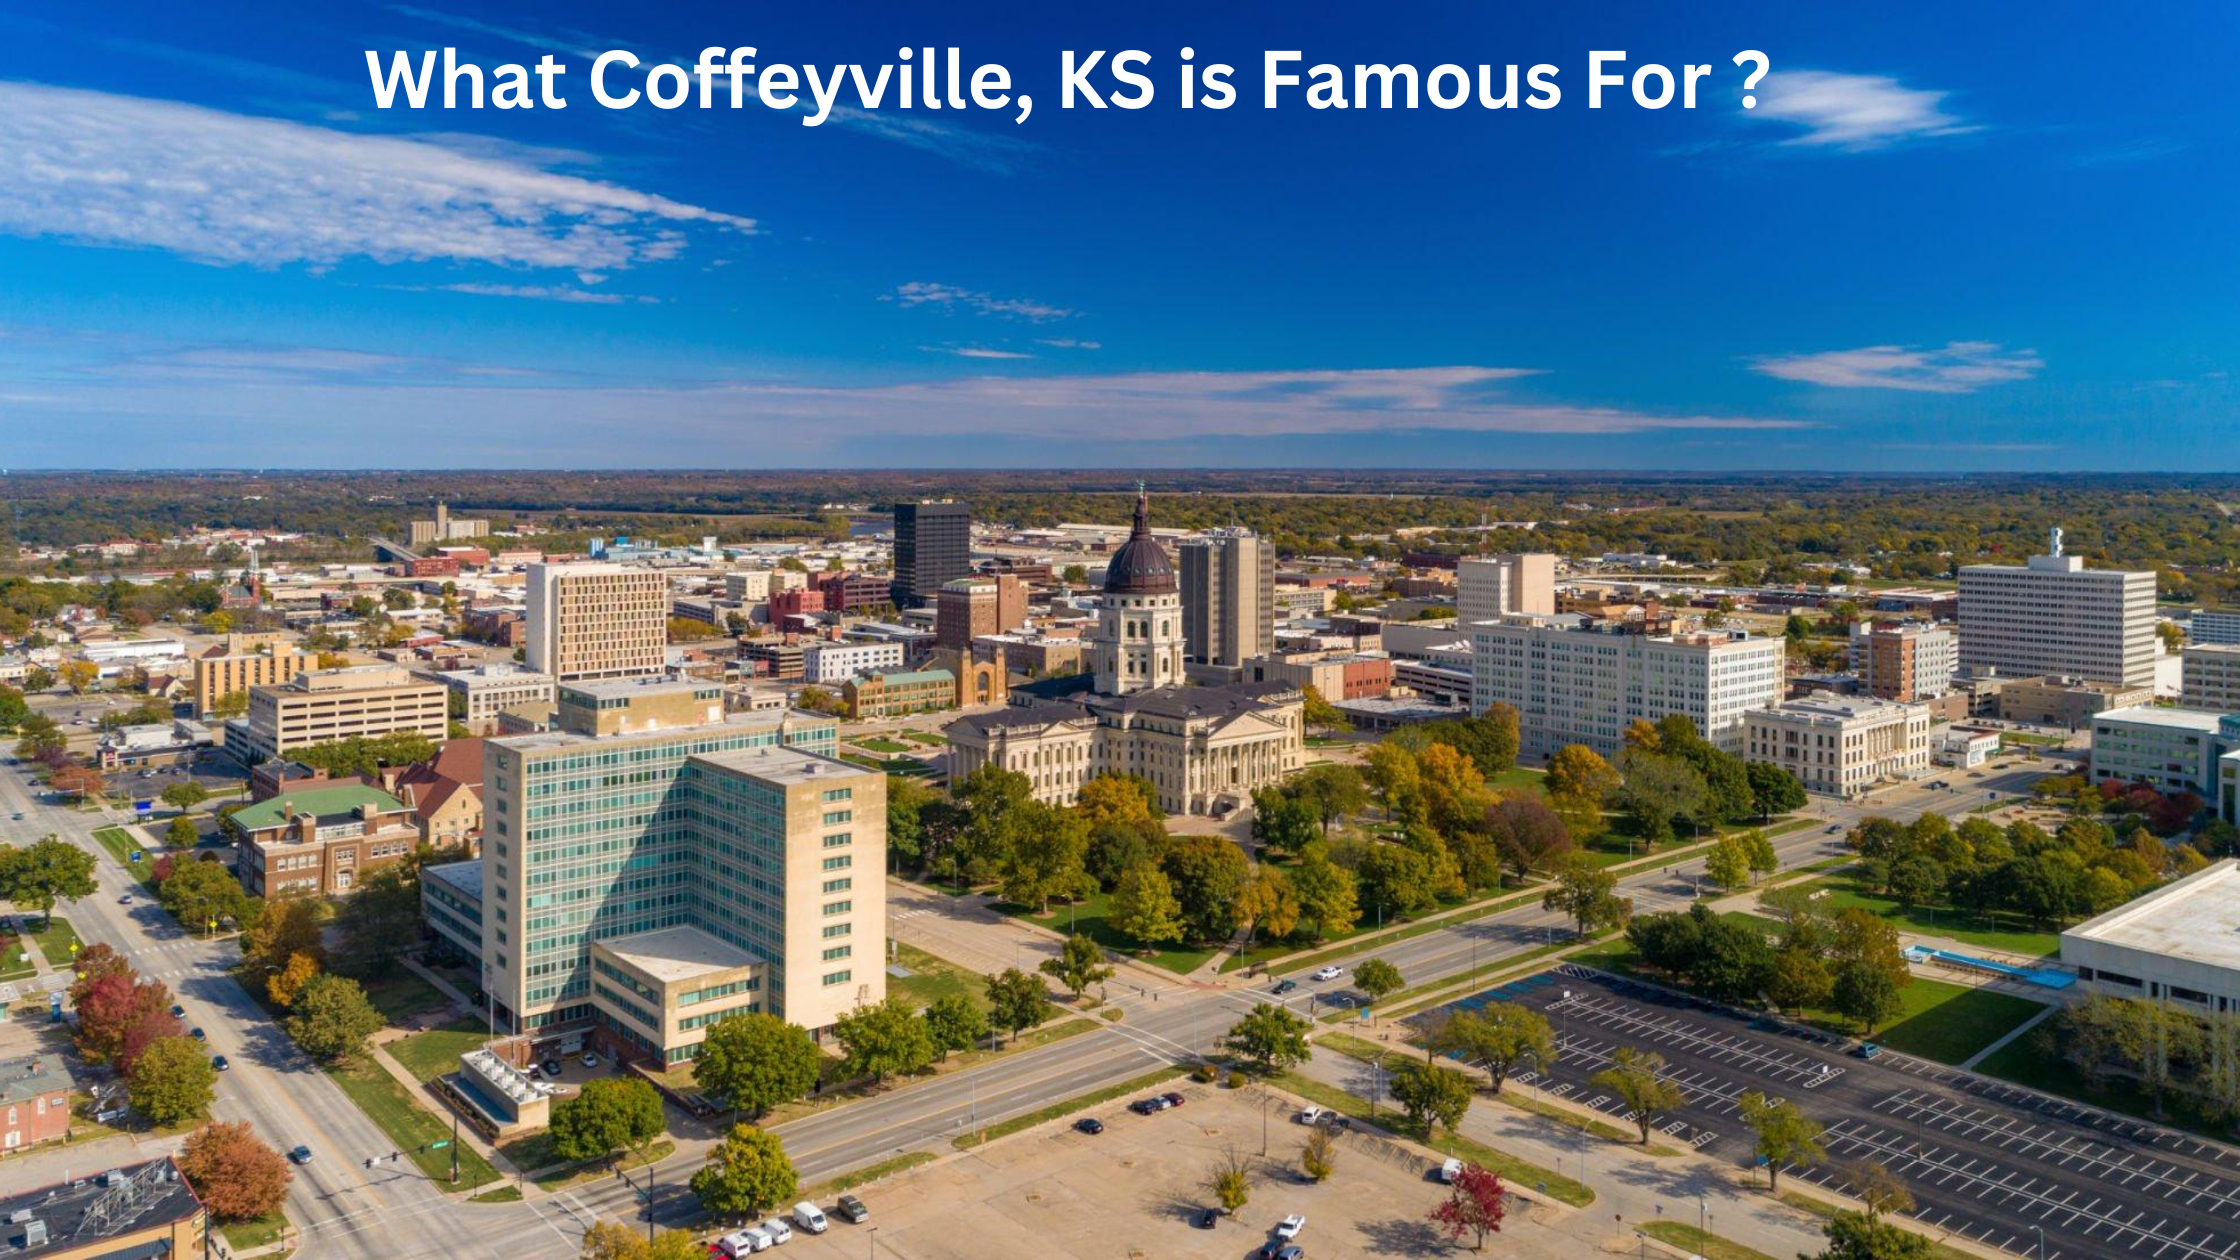 What Coffeyville, KS is Famous For